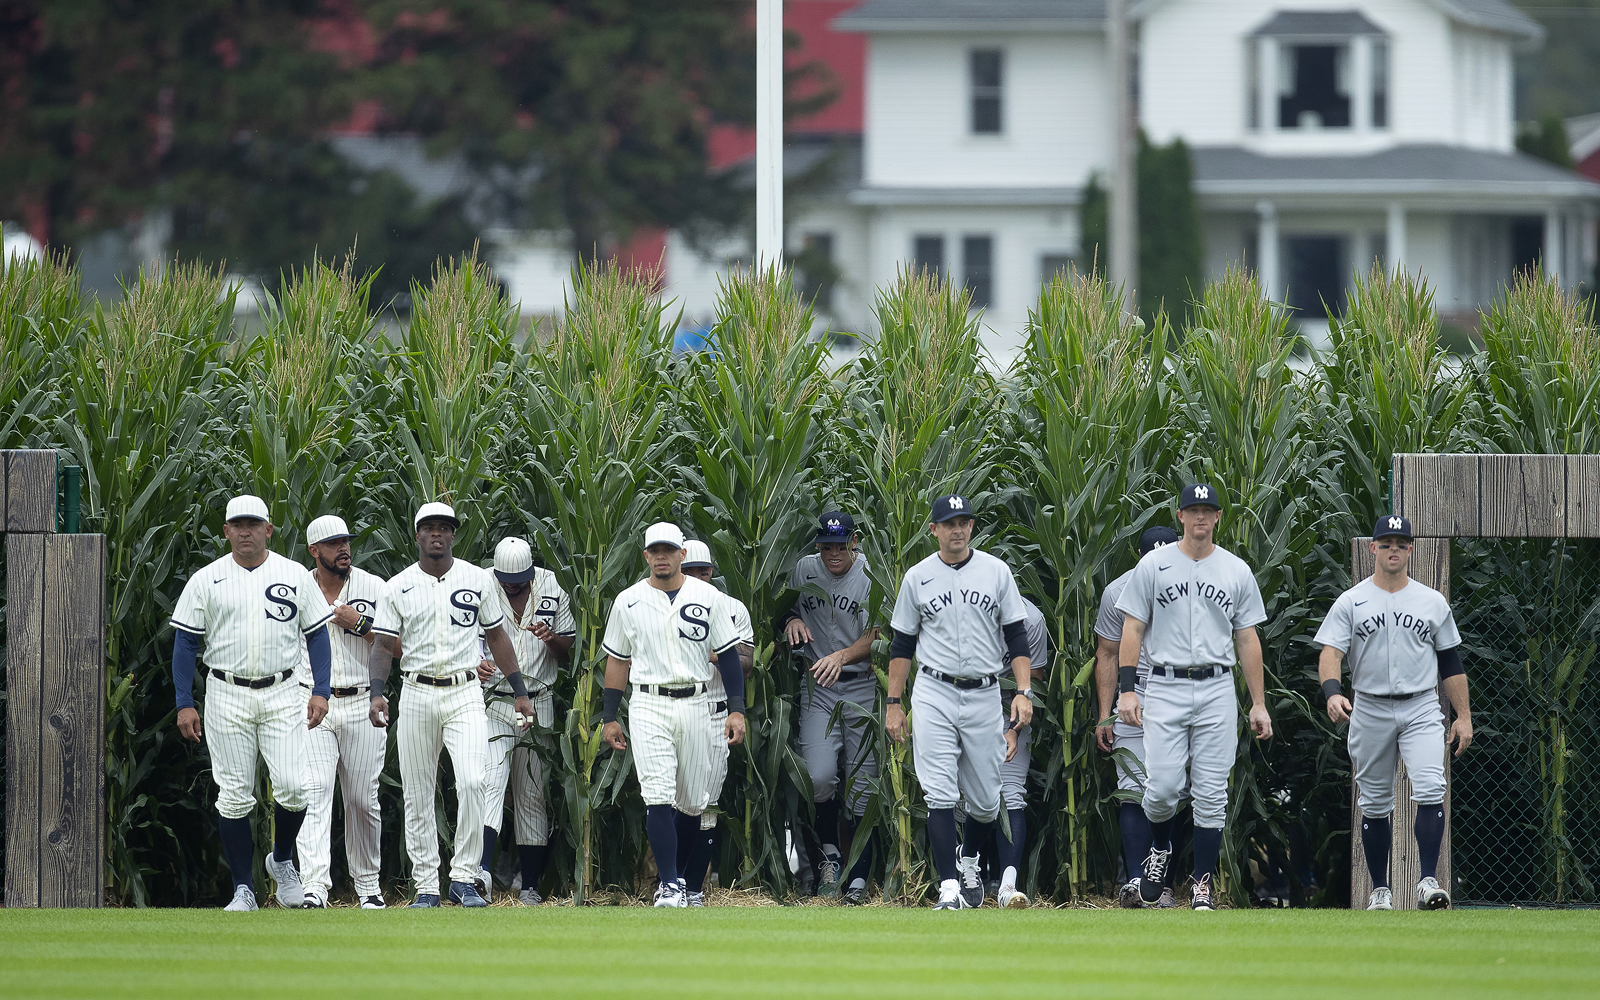 Members of the Chicago White Sox and New York Yankees walk onto the field of the first Major League Baseball game played at the Field of Dreams in Dyersville, Iowa on Thursday Aug. 12, 2021.